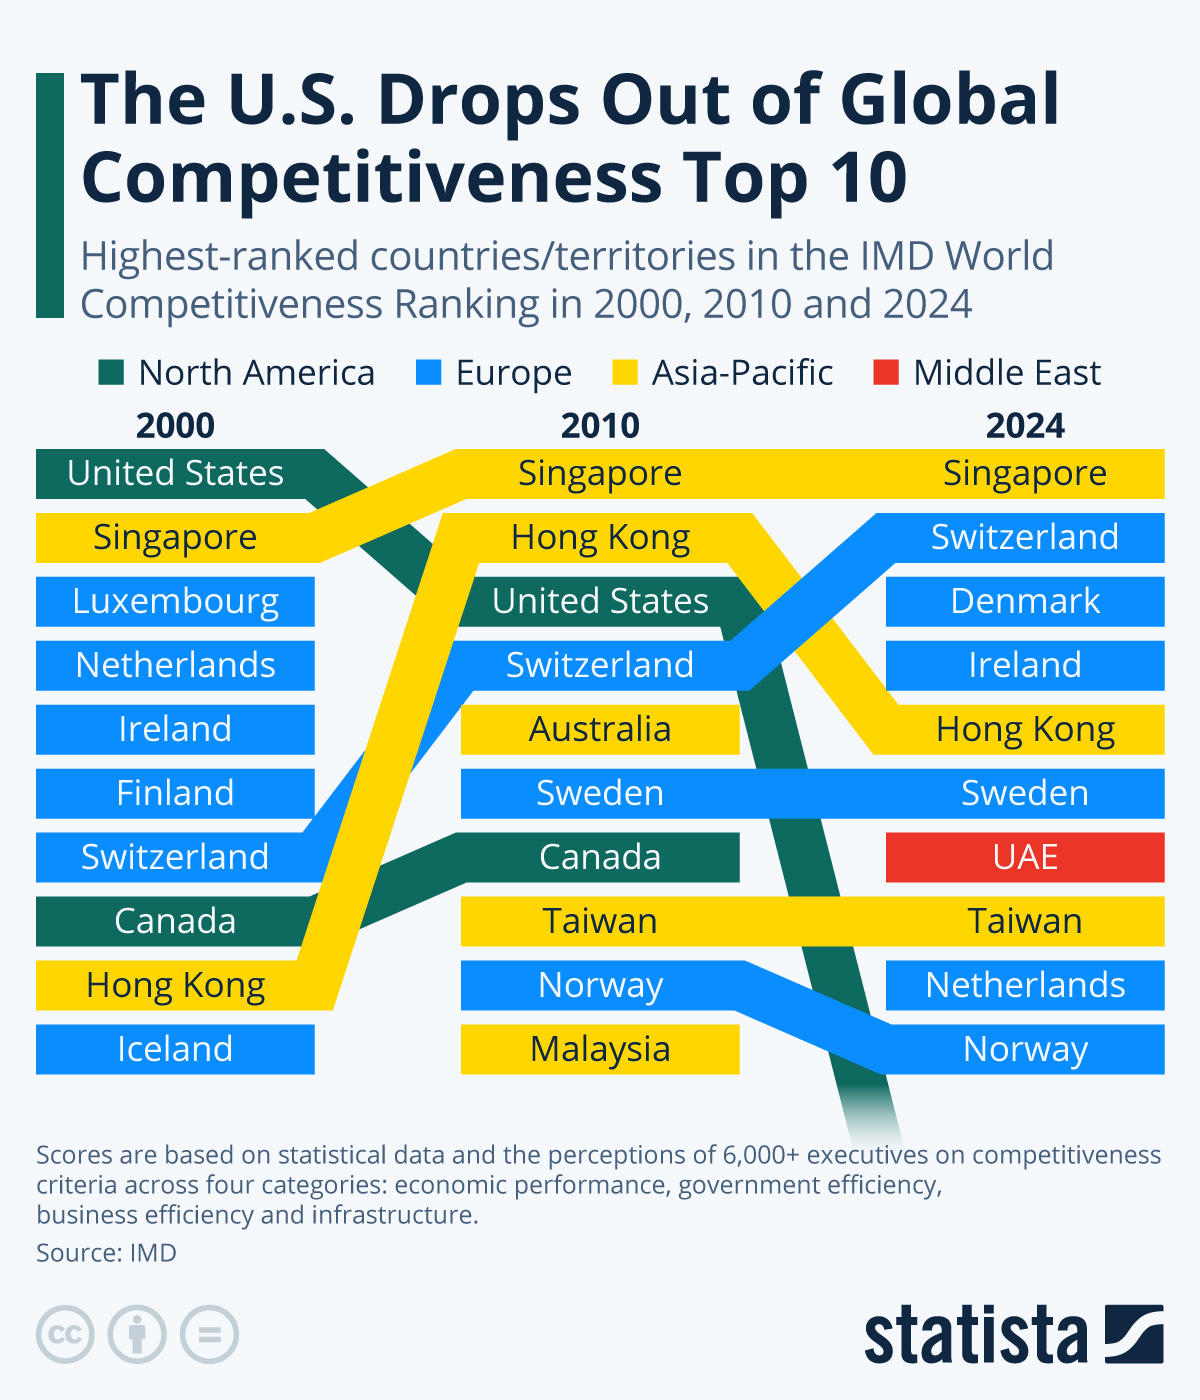 Global Competitiveness Index 2023: Denmark, Ireland, and Switzerland Lead the Way